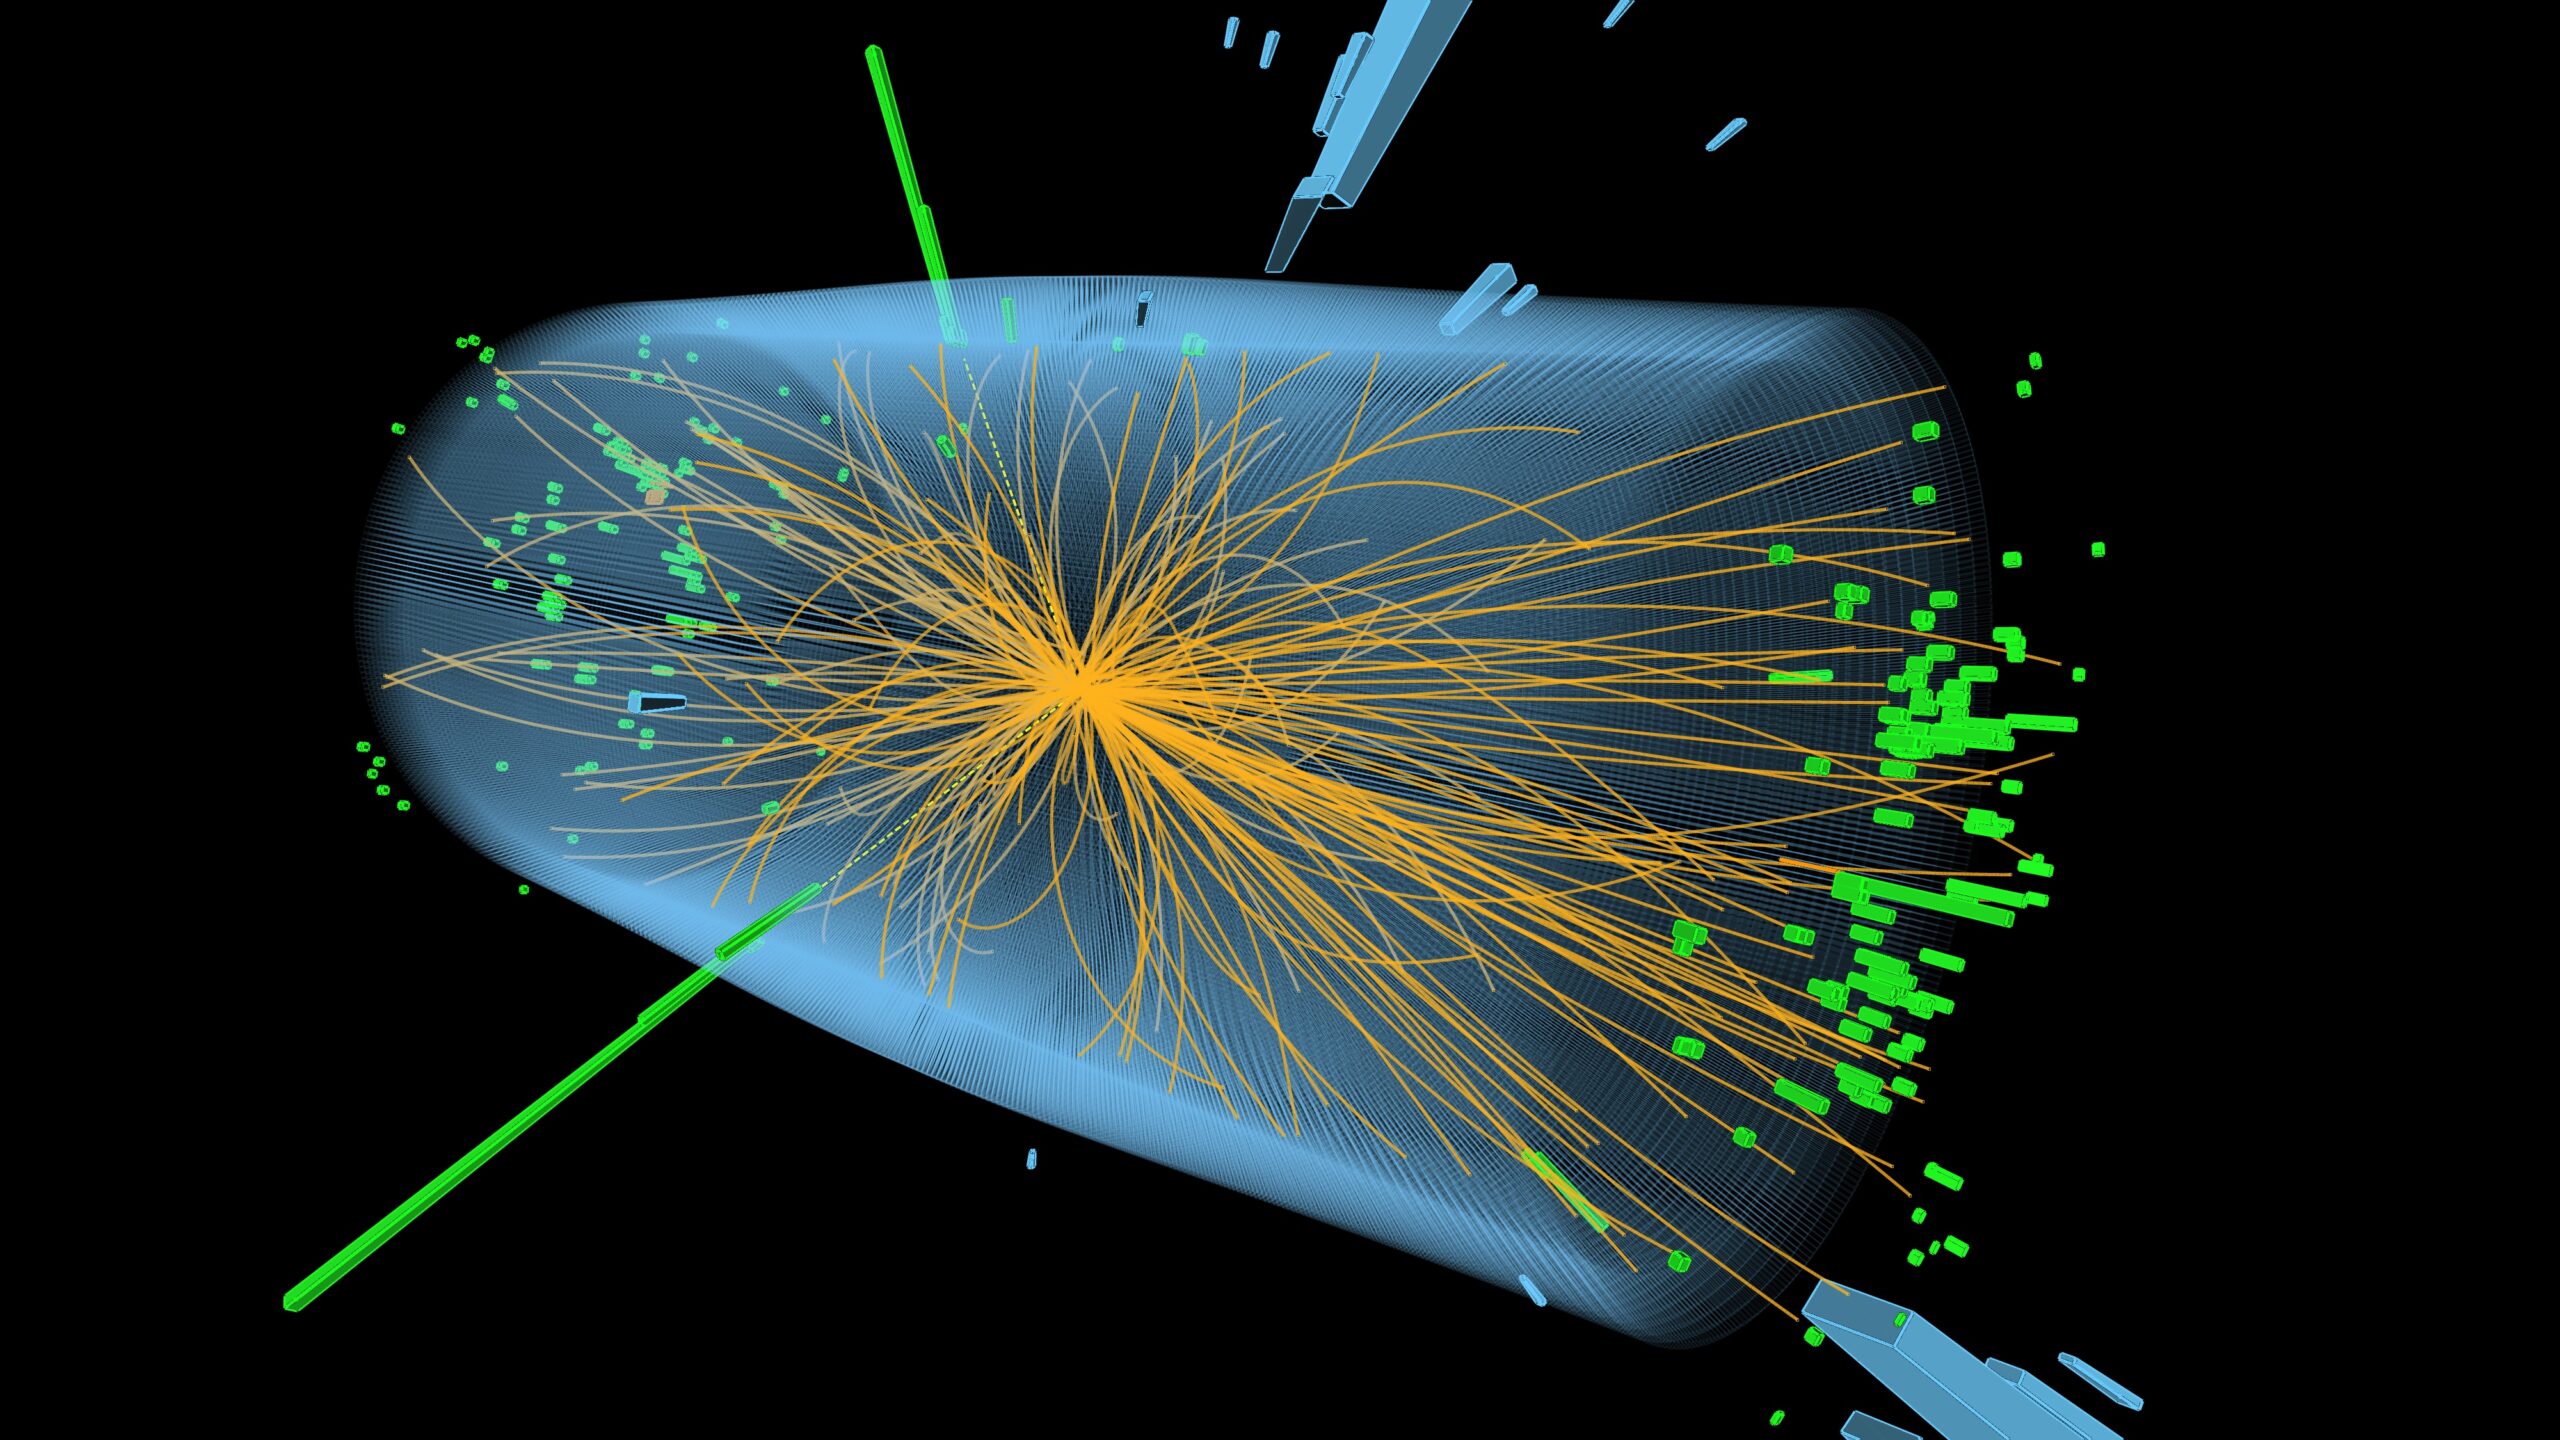 A 3D visualization of a particle collision at a particle accelerator, showing a spray of tracks emerging from a point.